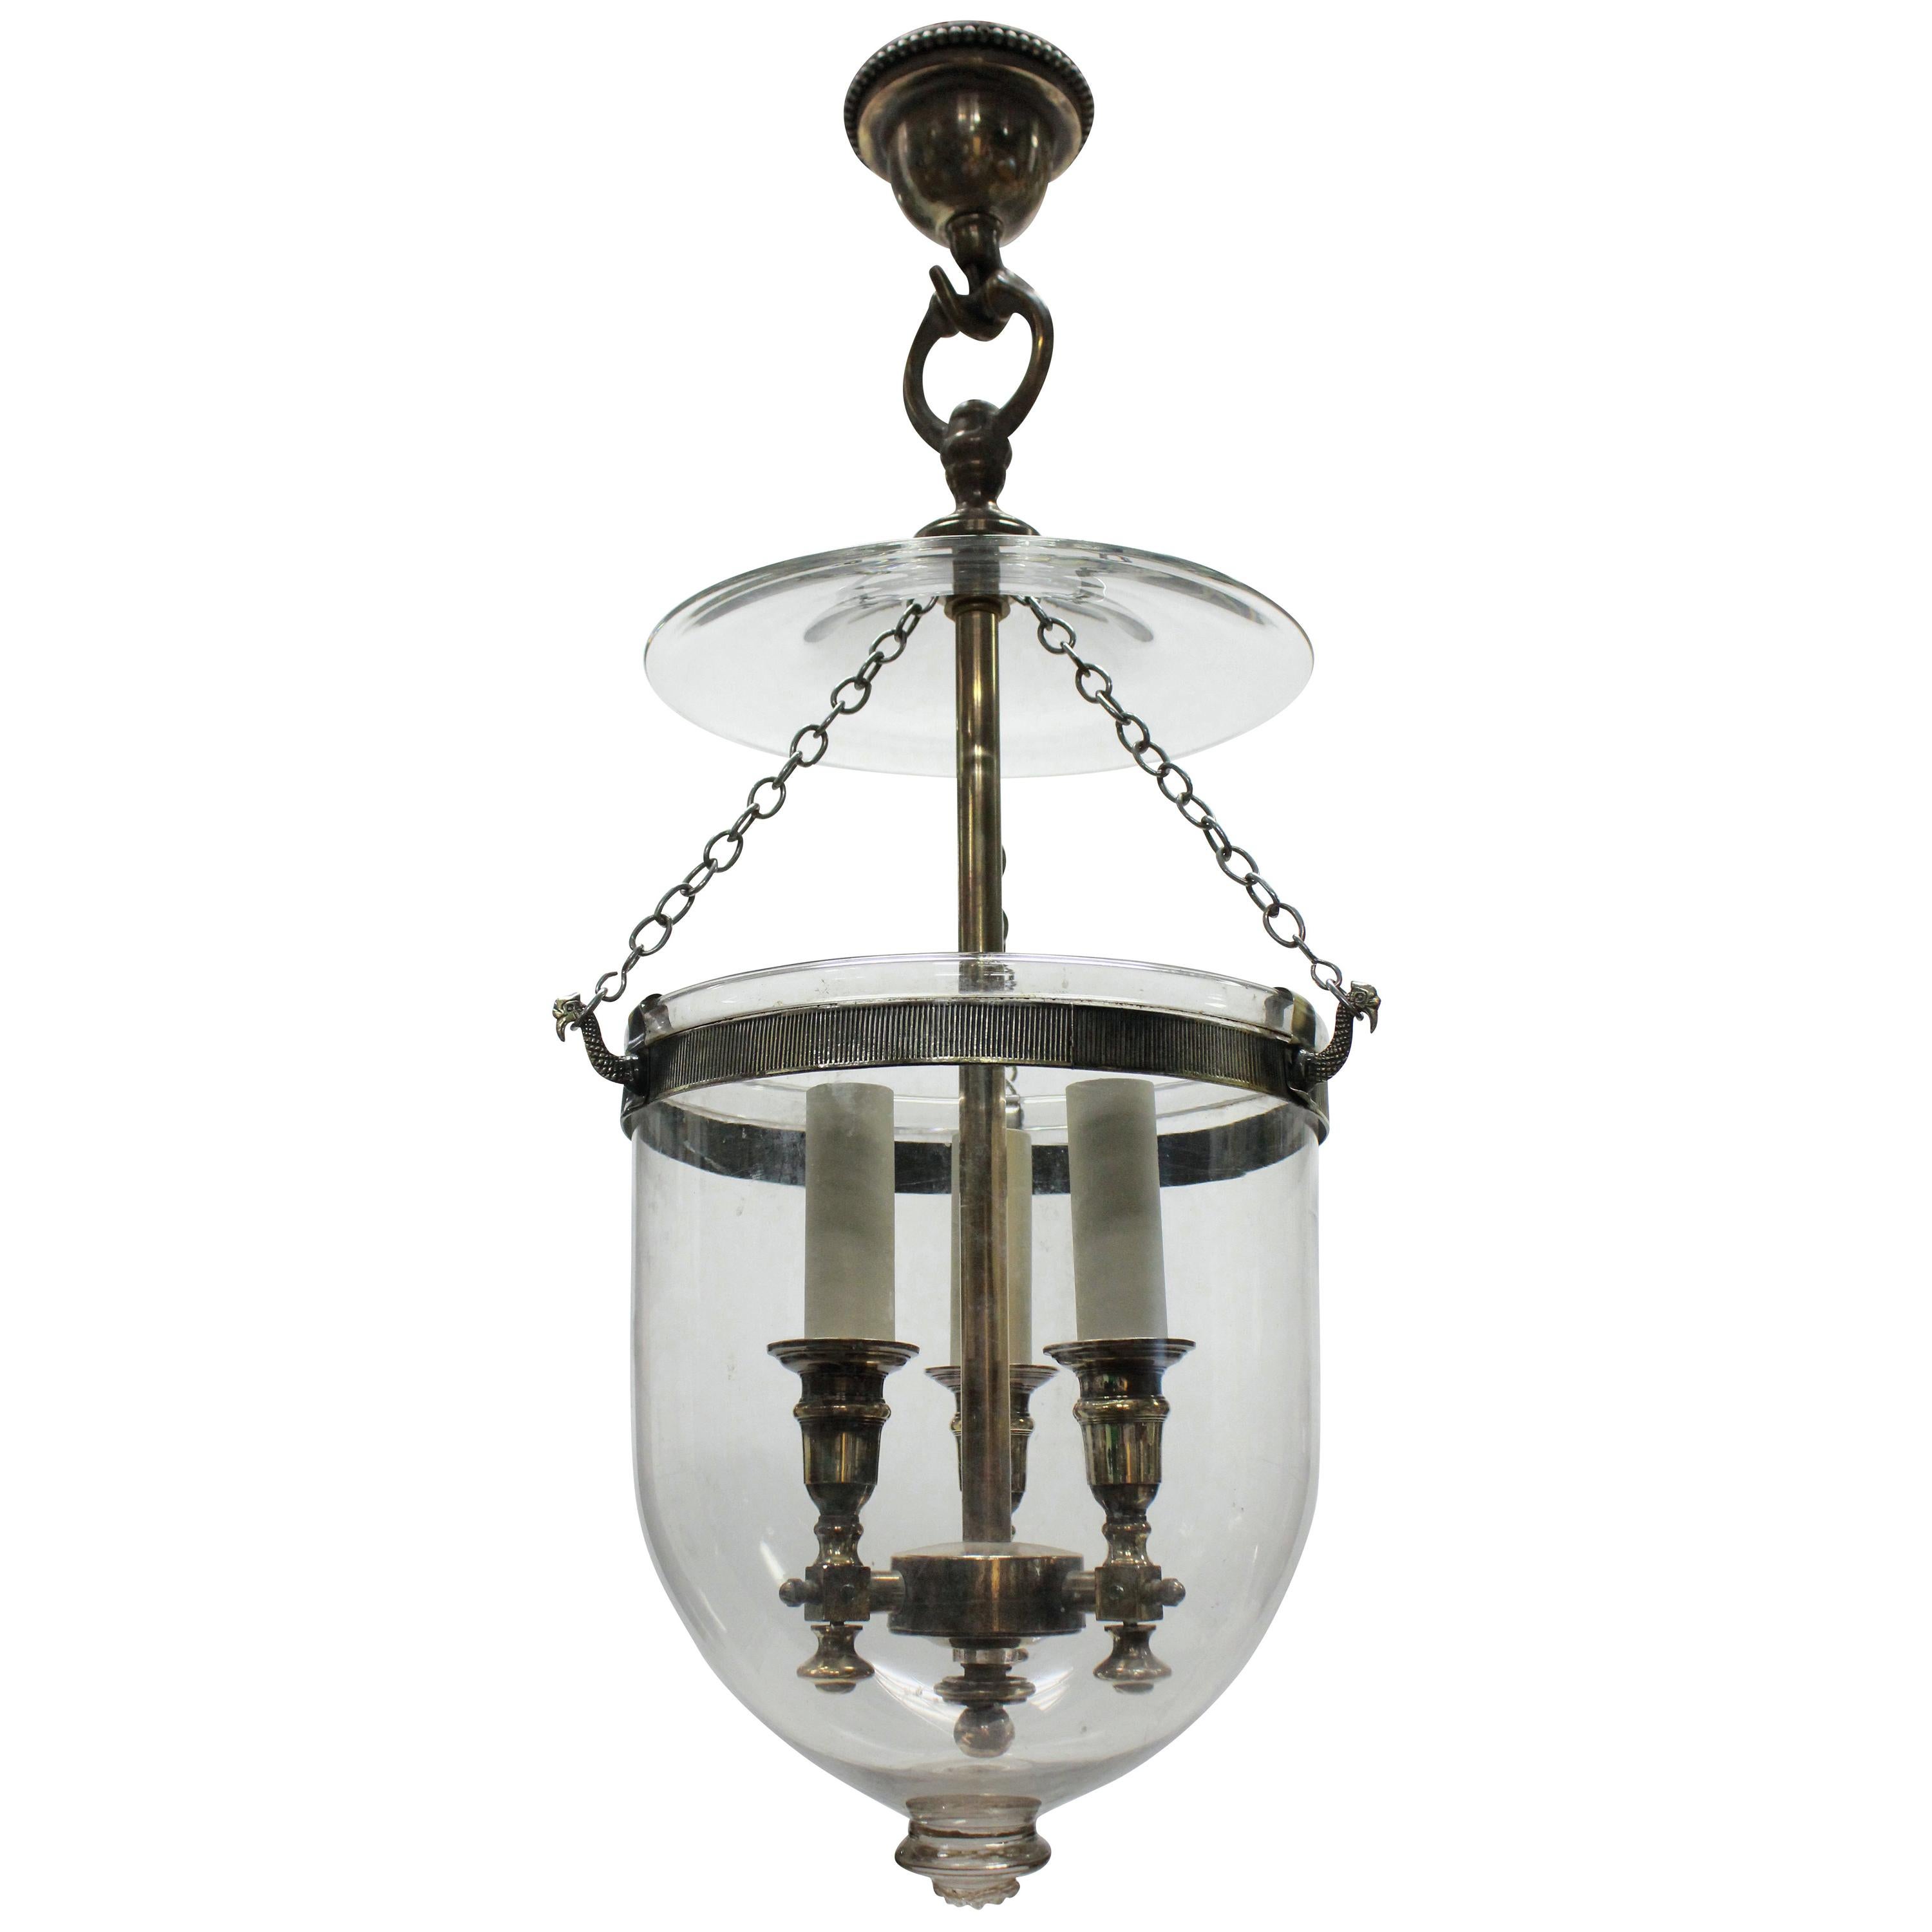 An English Regency style silver plated and glass hanging lantern.